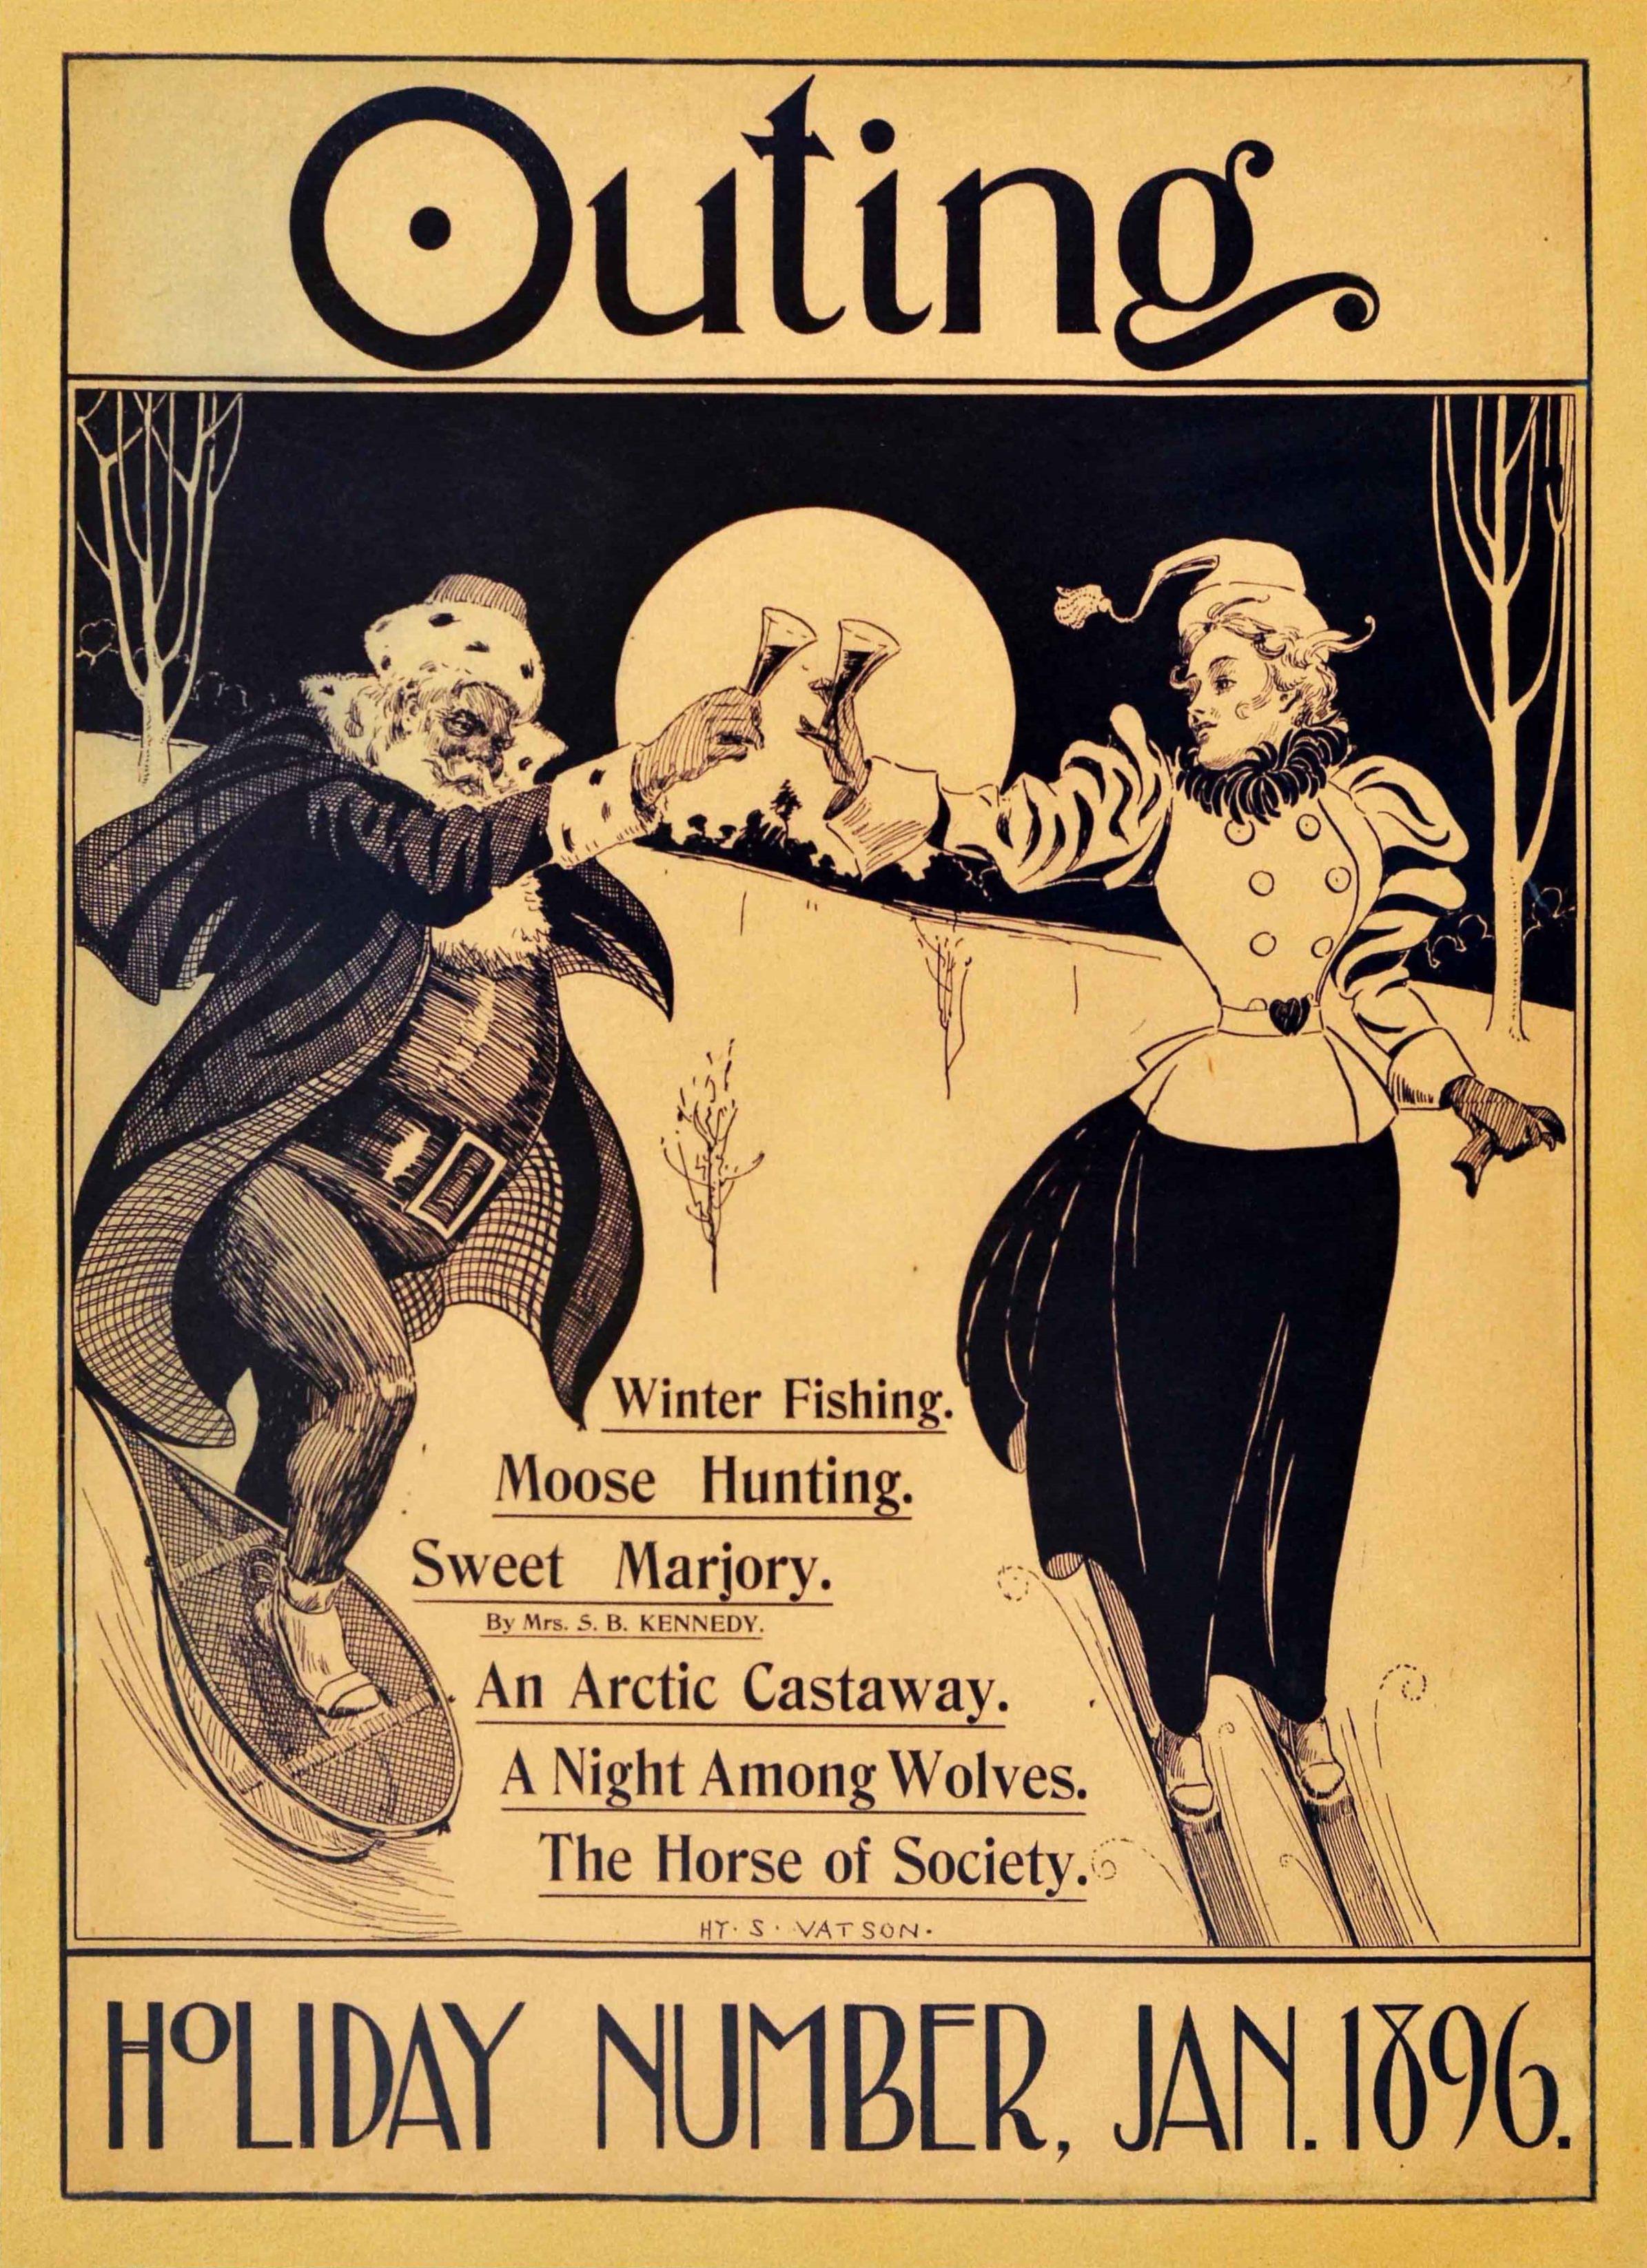 Original antique advertising poster for an American sports magazine (1882-1923): Outing Holiday Number January 1896 featuring a great winter scene showing Father Christmas / Santa Claus / St Nicholas wearing a warm coat and walking in snow shoes